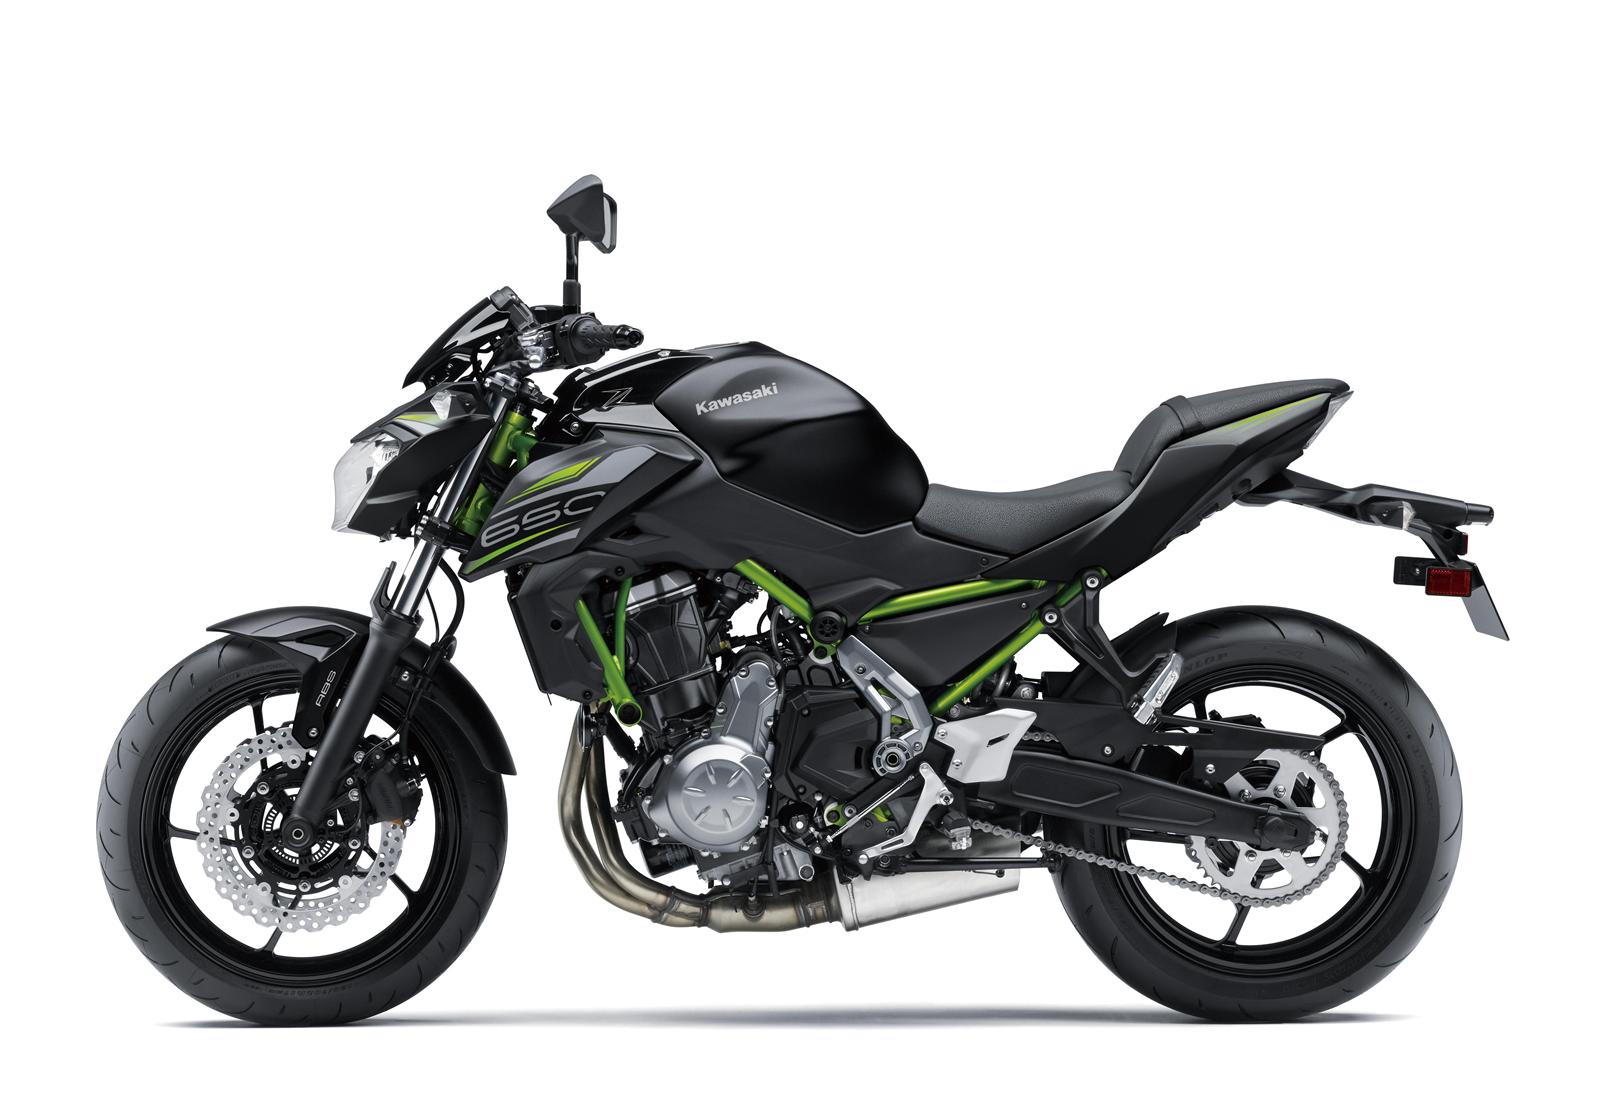 Støjende Forebyggelse diagonal 2019 Kawasaki Z650 launched in India, Priced at INR 5.29 lakh